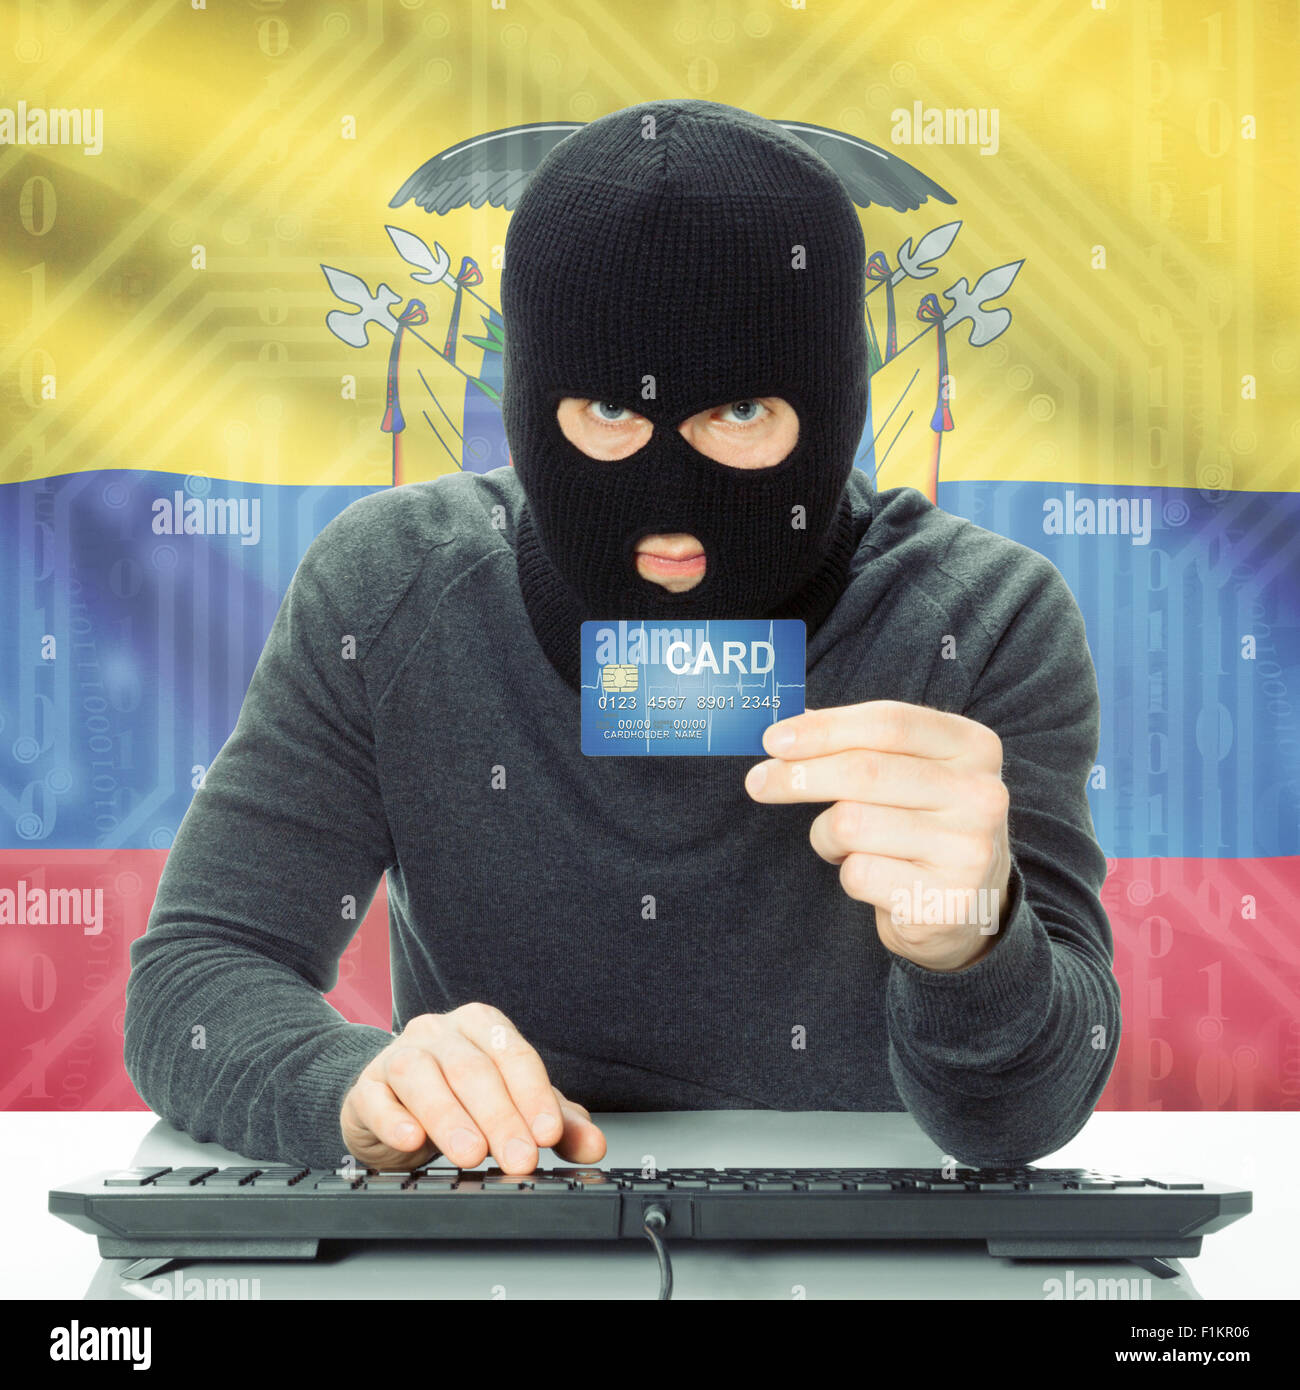 Cybercrime concept with flag on background - Ecuador Stock Photo